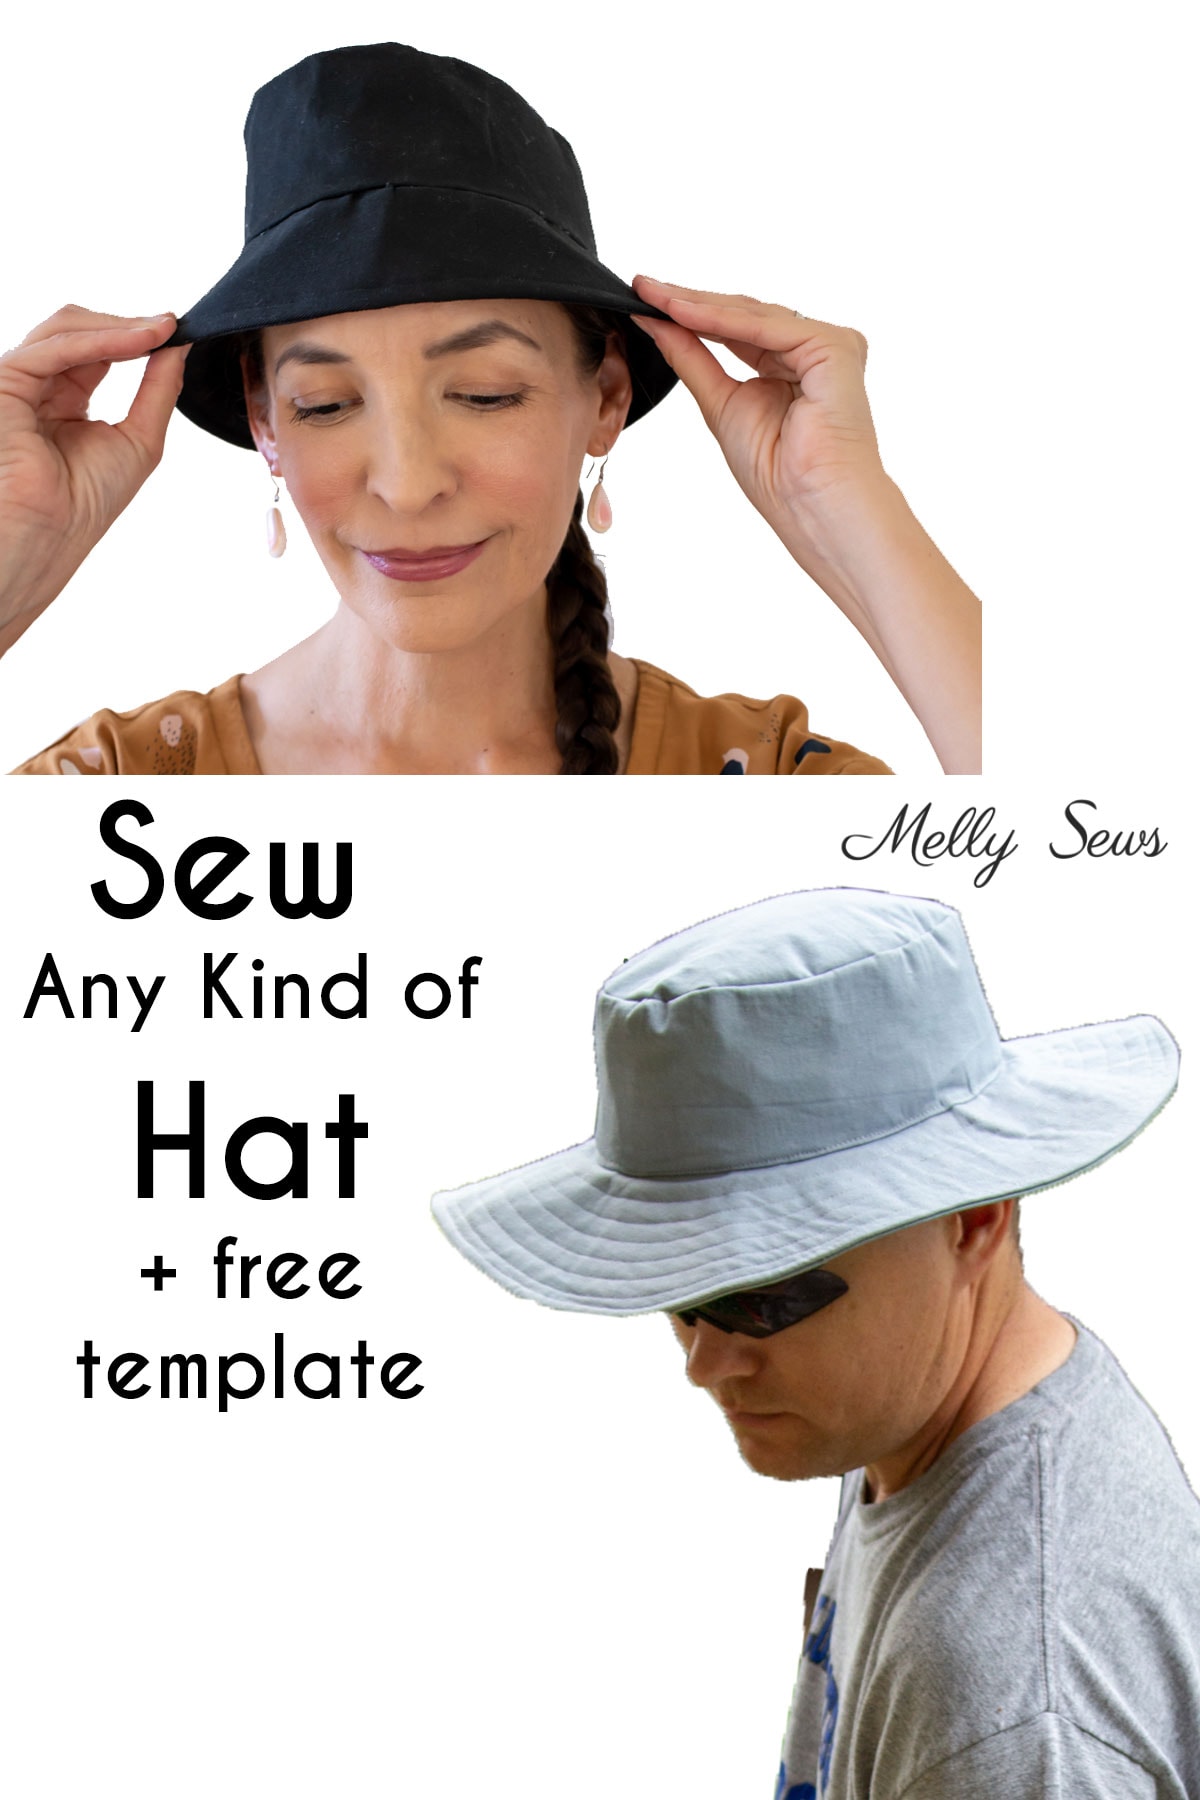 Sew a Hat - How to Make a Custom Hat in 5 Easy Steps - Melly Sews